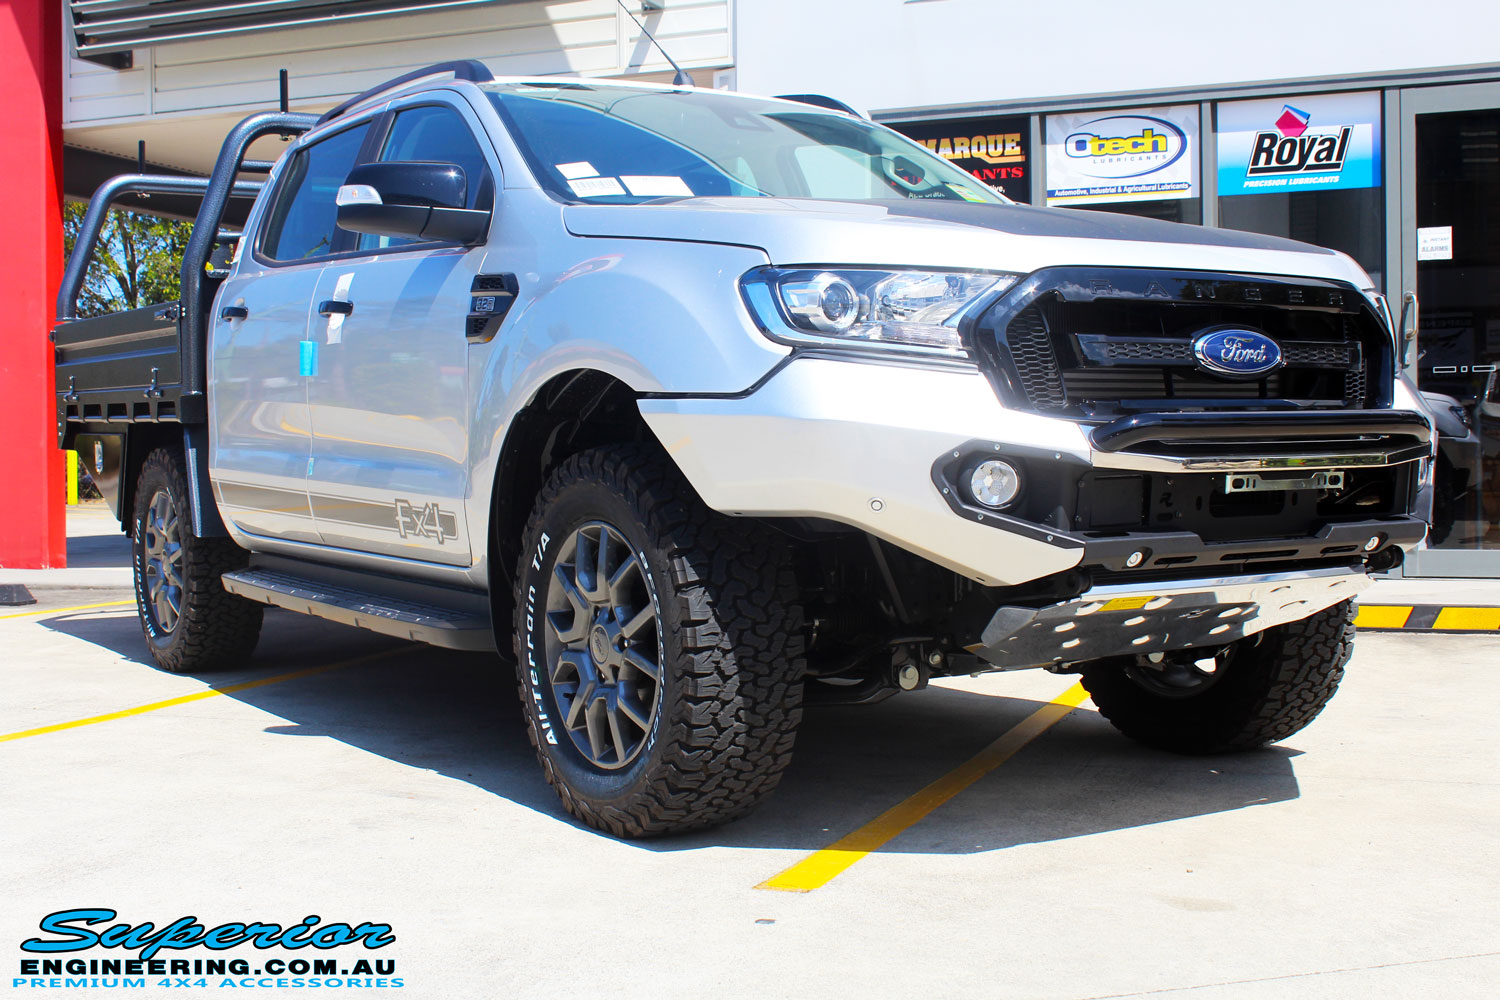 Right front side view of a Silver Ford PXIII Ranger Dual Cab after fitment with a Rhino 4x4 Evolution 3D Winch Bar